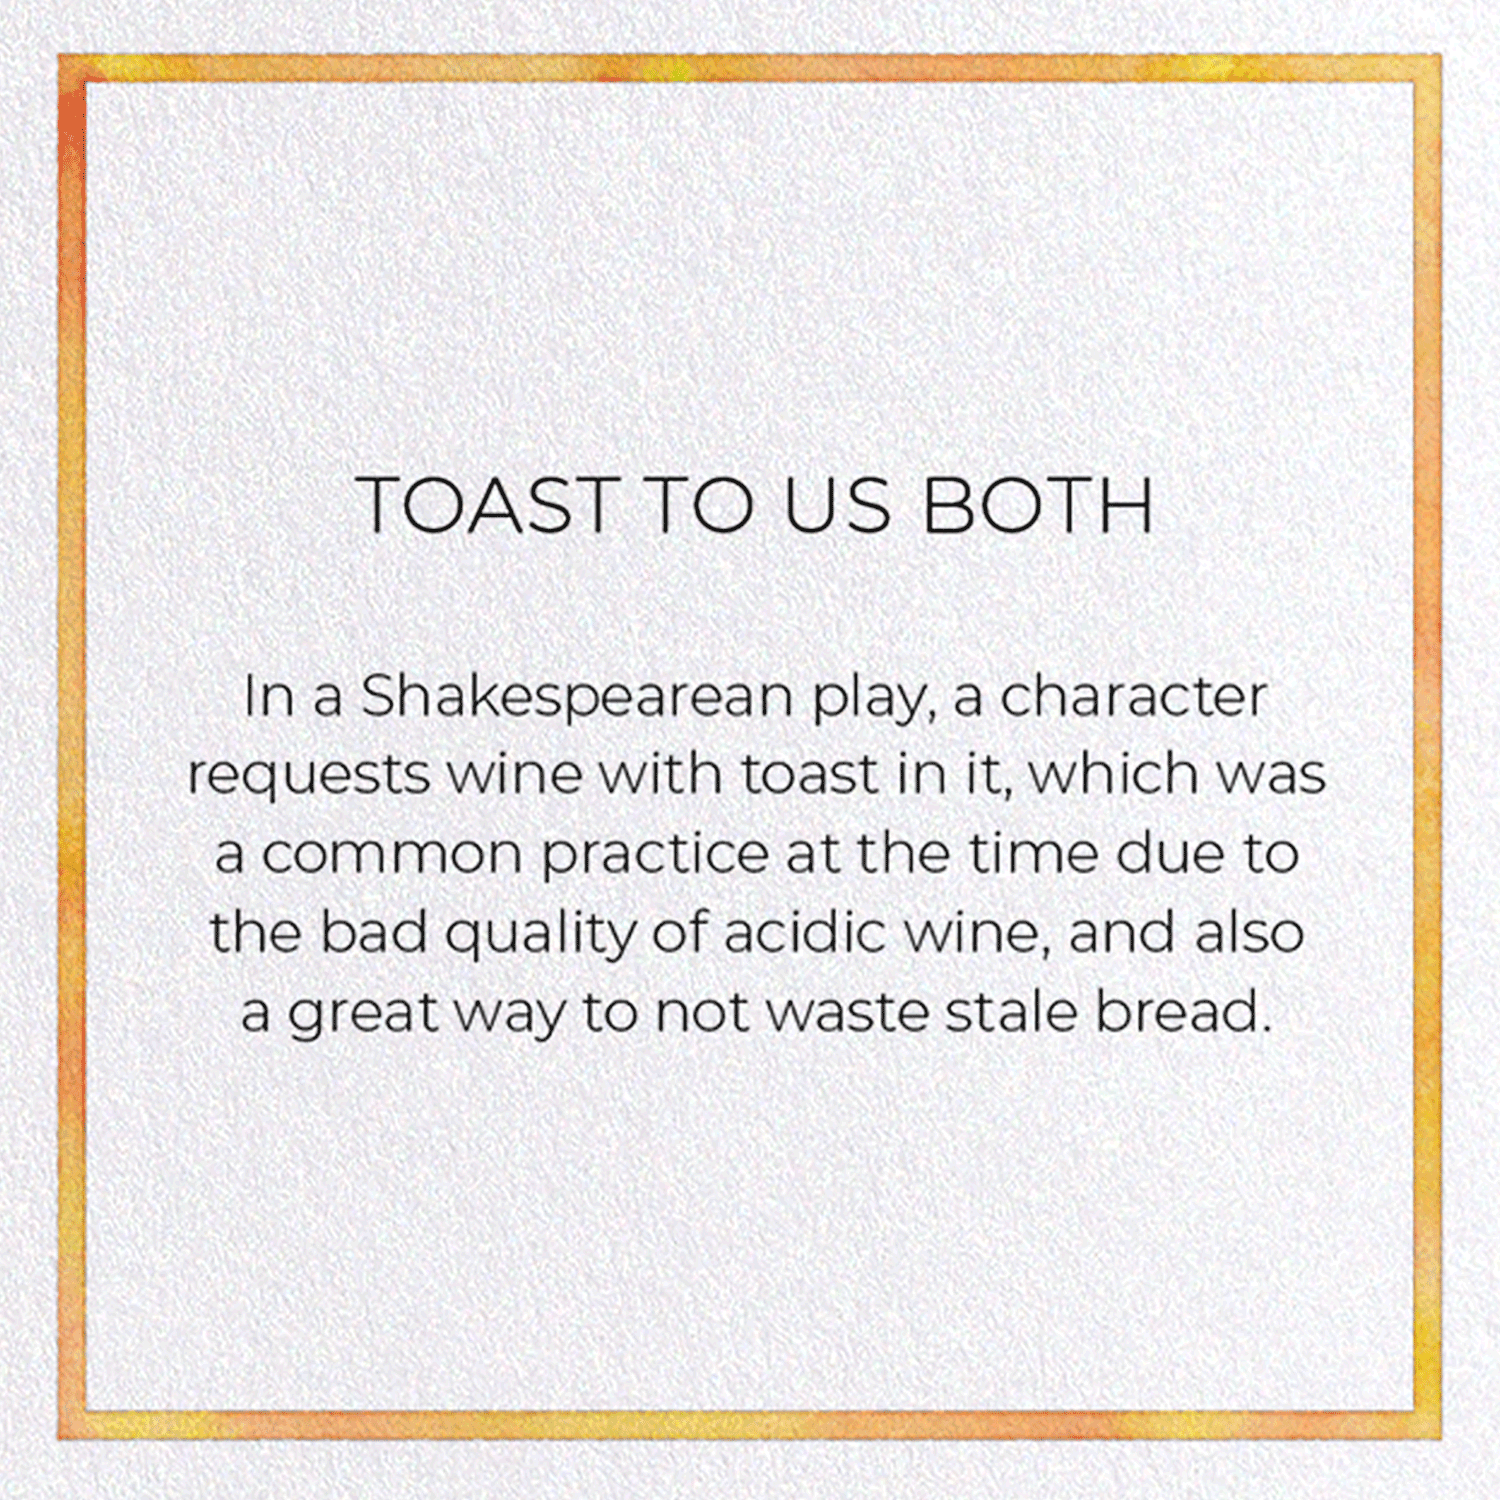 TOAST TO US BOTH